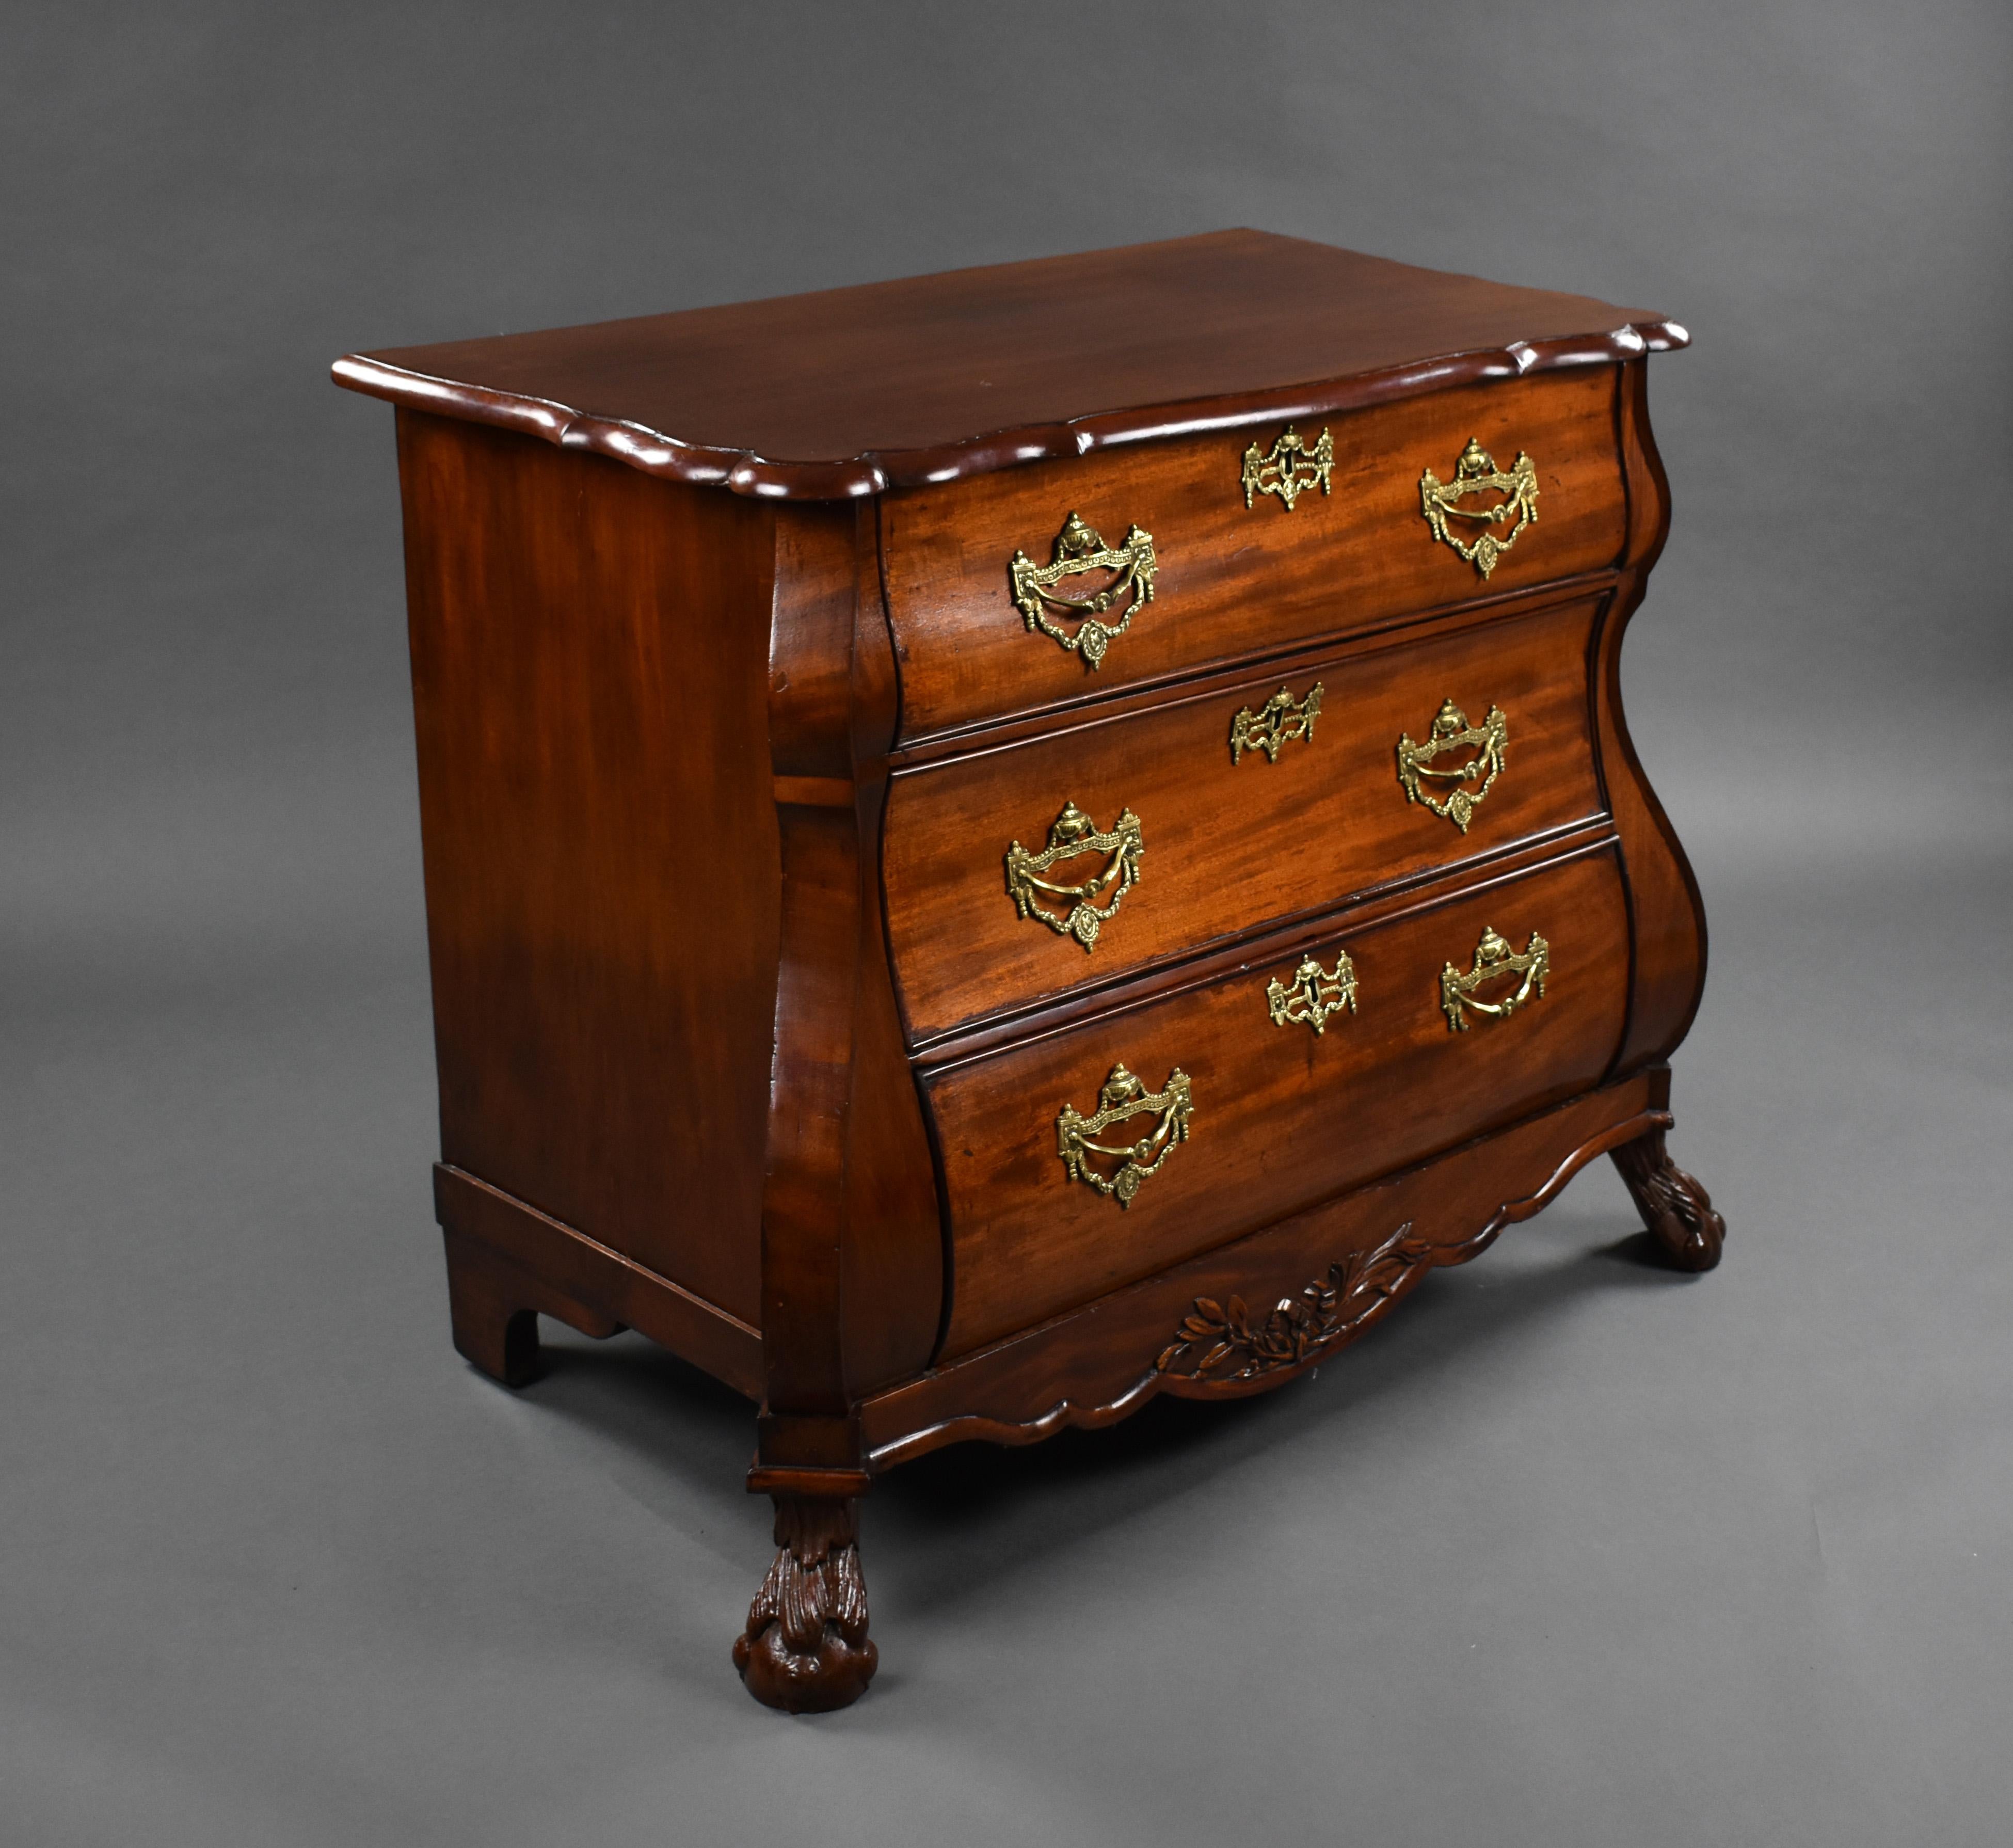 A 19th century Dutch mahogany chest of drawers. The bombe shaped commode chest has a shaped top above three long graduated drawers, each with ornate brass handles and escutcheons, standing on carved claw and ball feet, the chest remains in very good